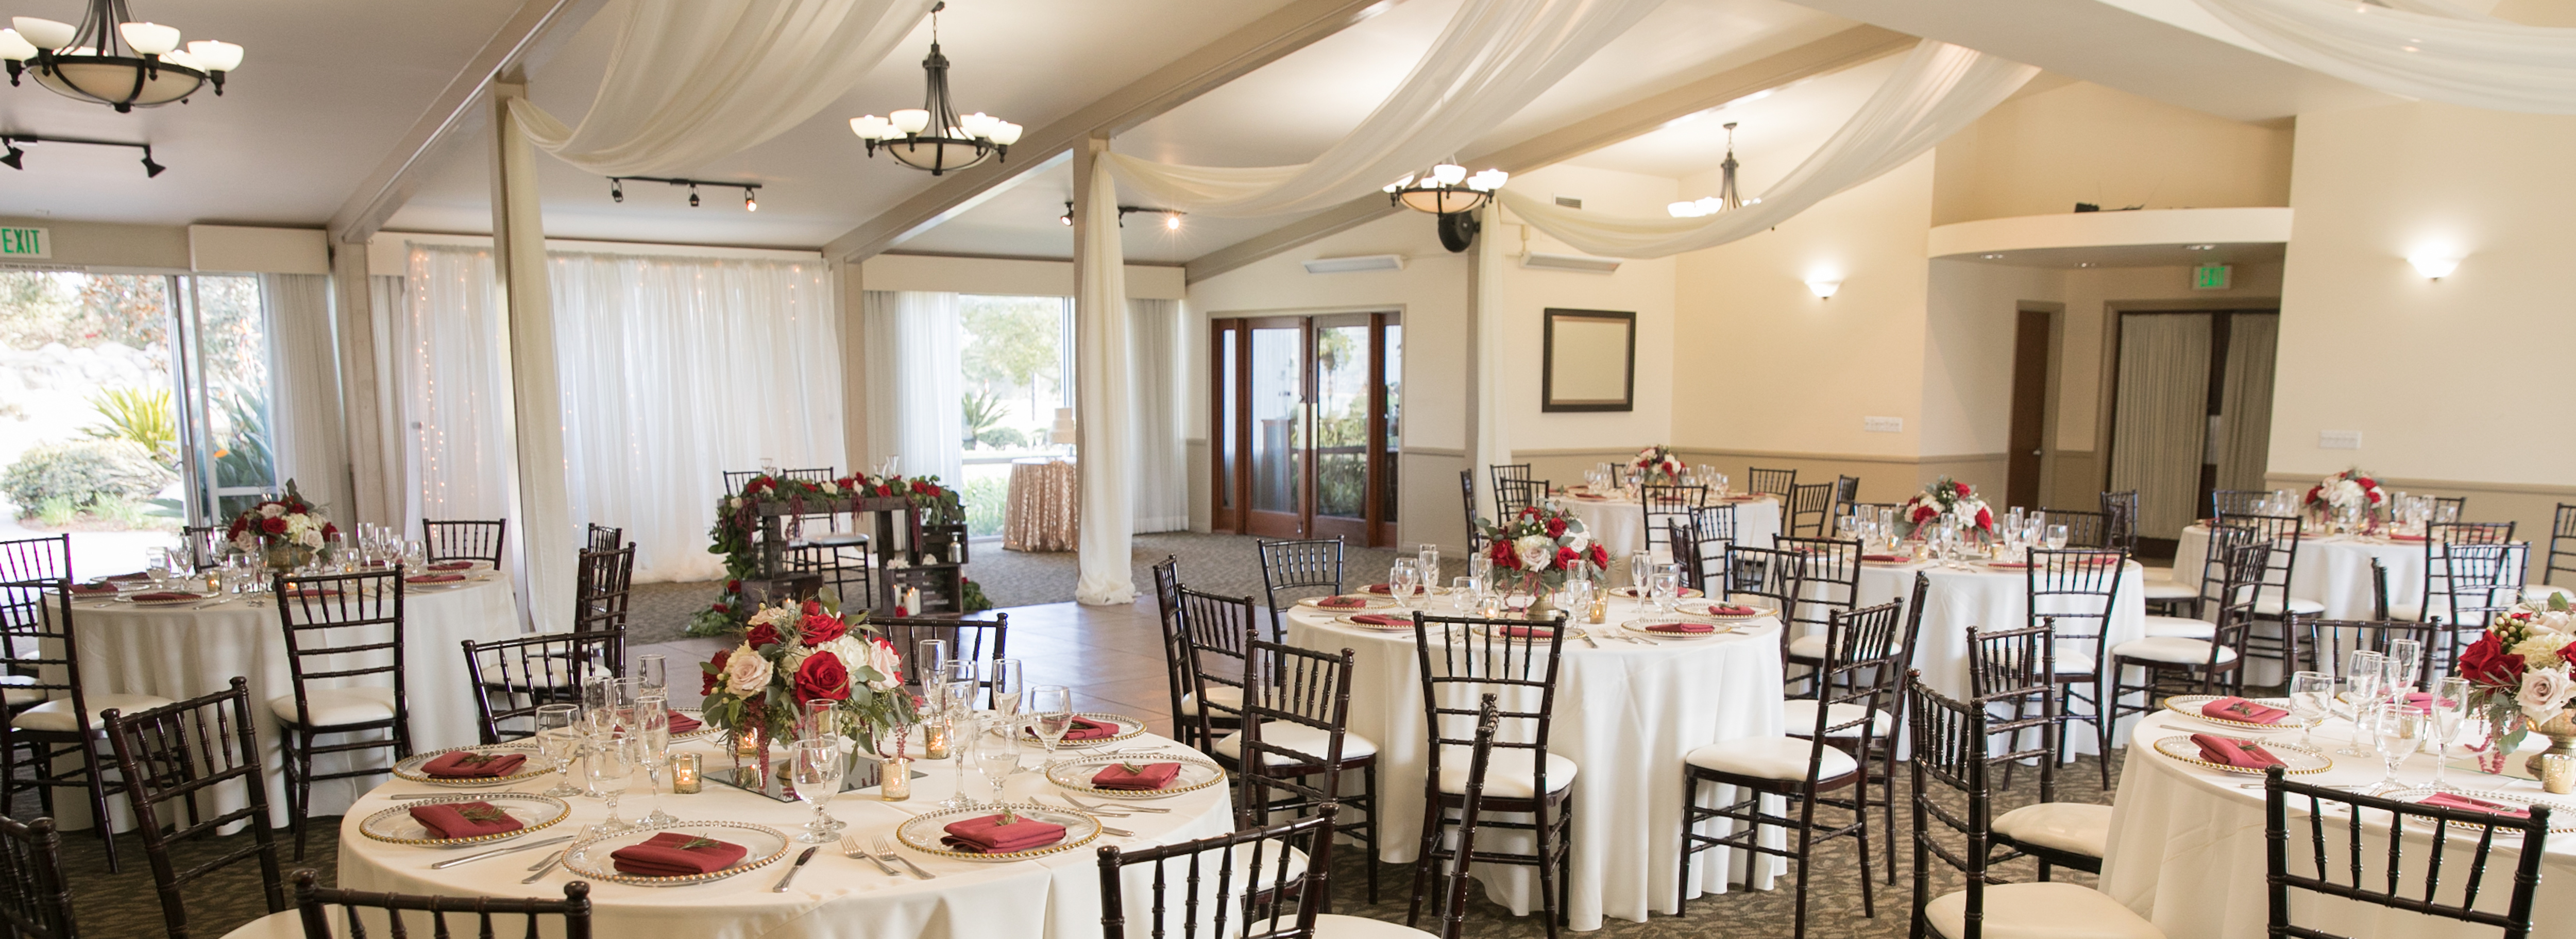 Affordable Outdoor Long Beach Weddings Venue Country Club Receptions